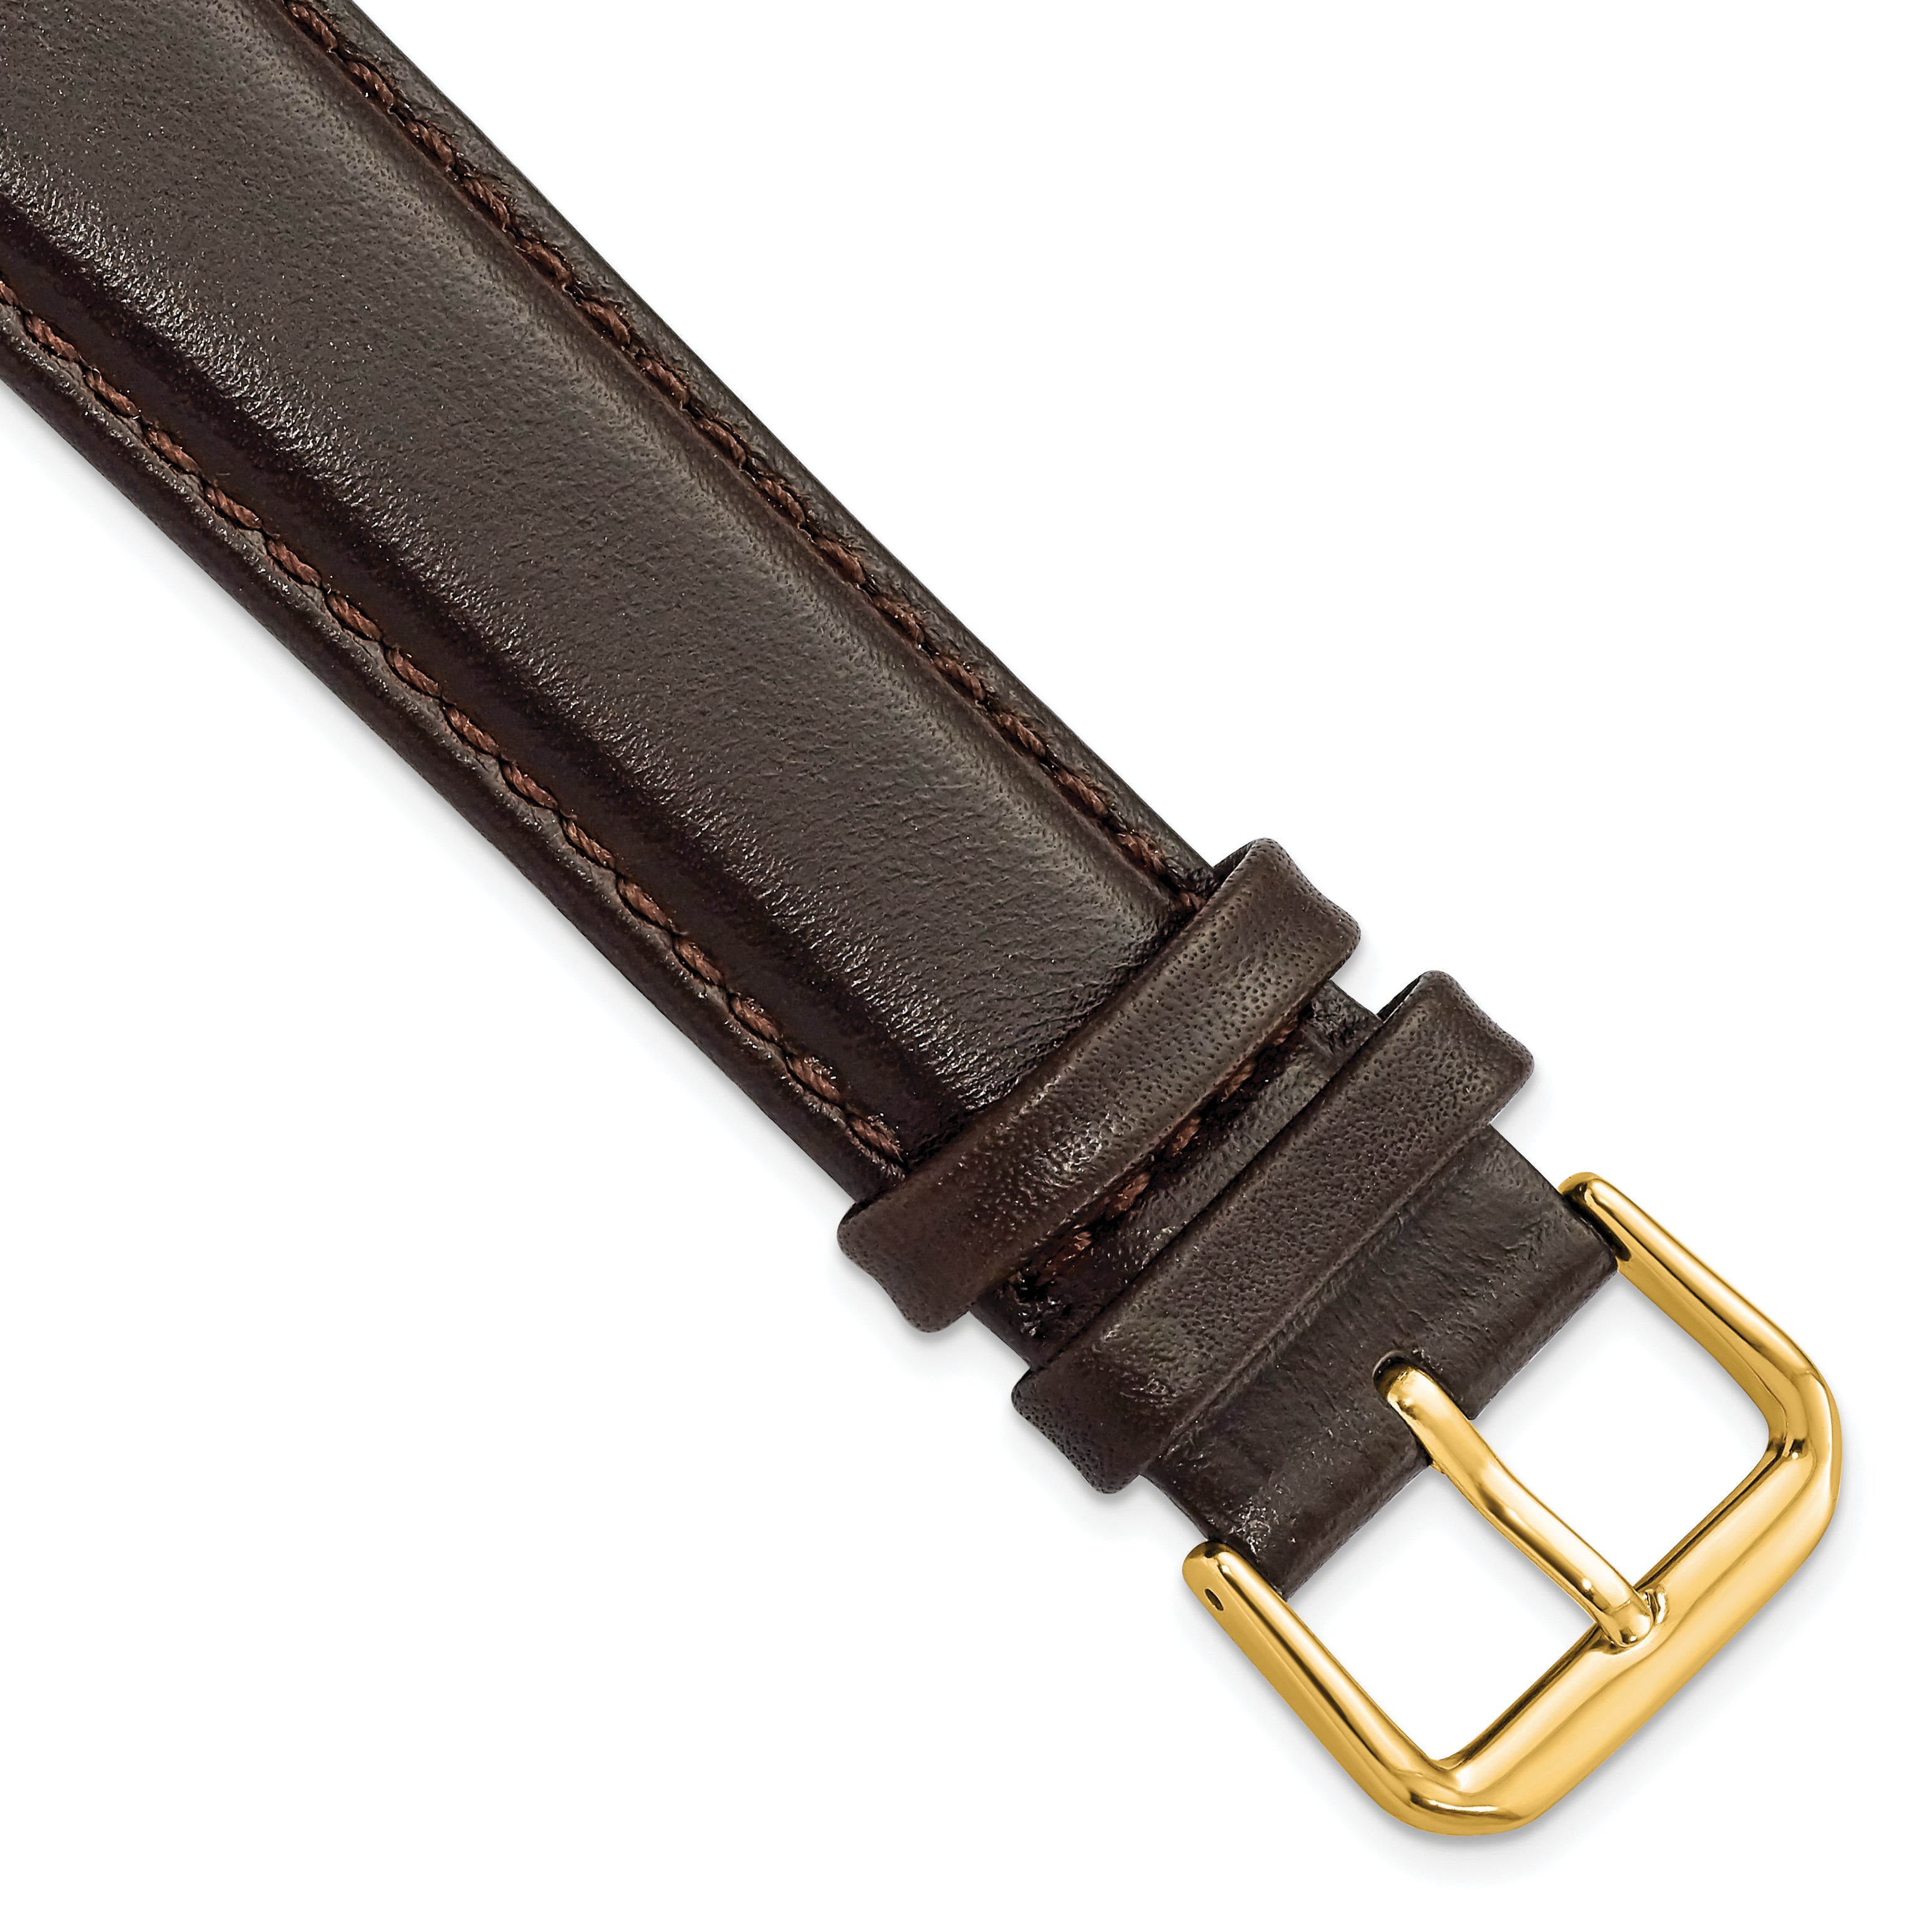 DeBeer 20mm Long Dark Brown Smooth Leather with Gold-tone Buckle 8.5 inch Watch Band